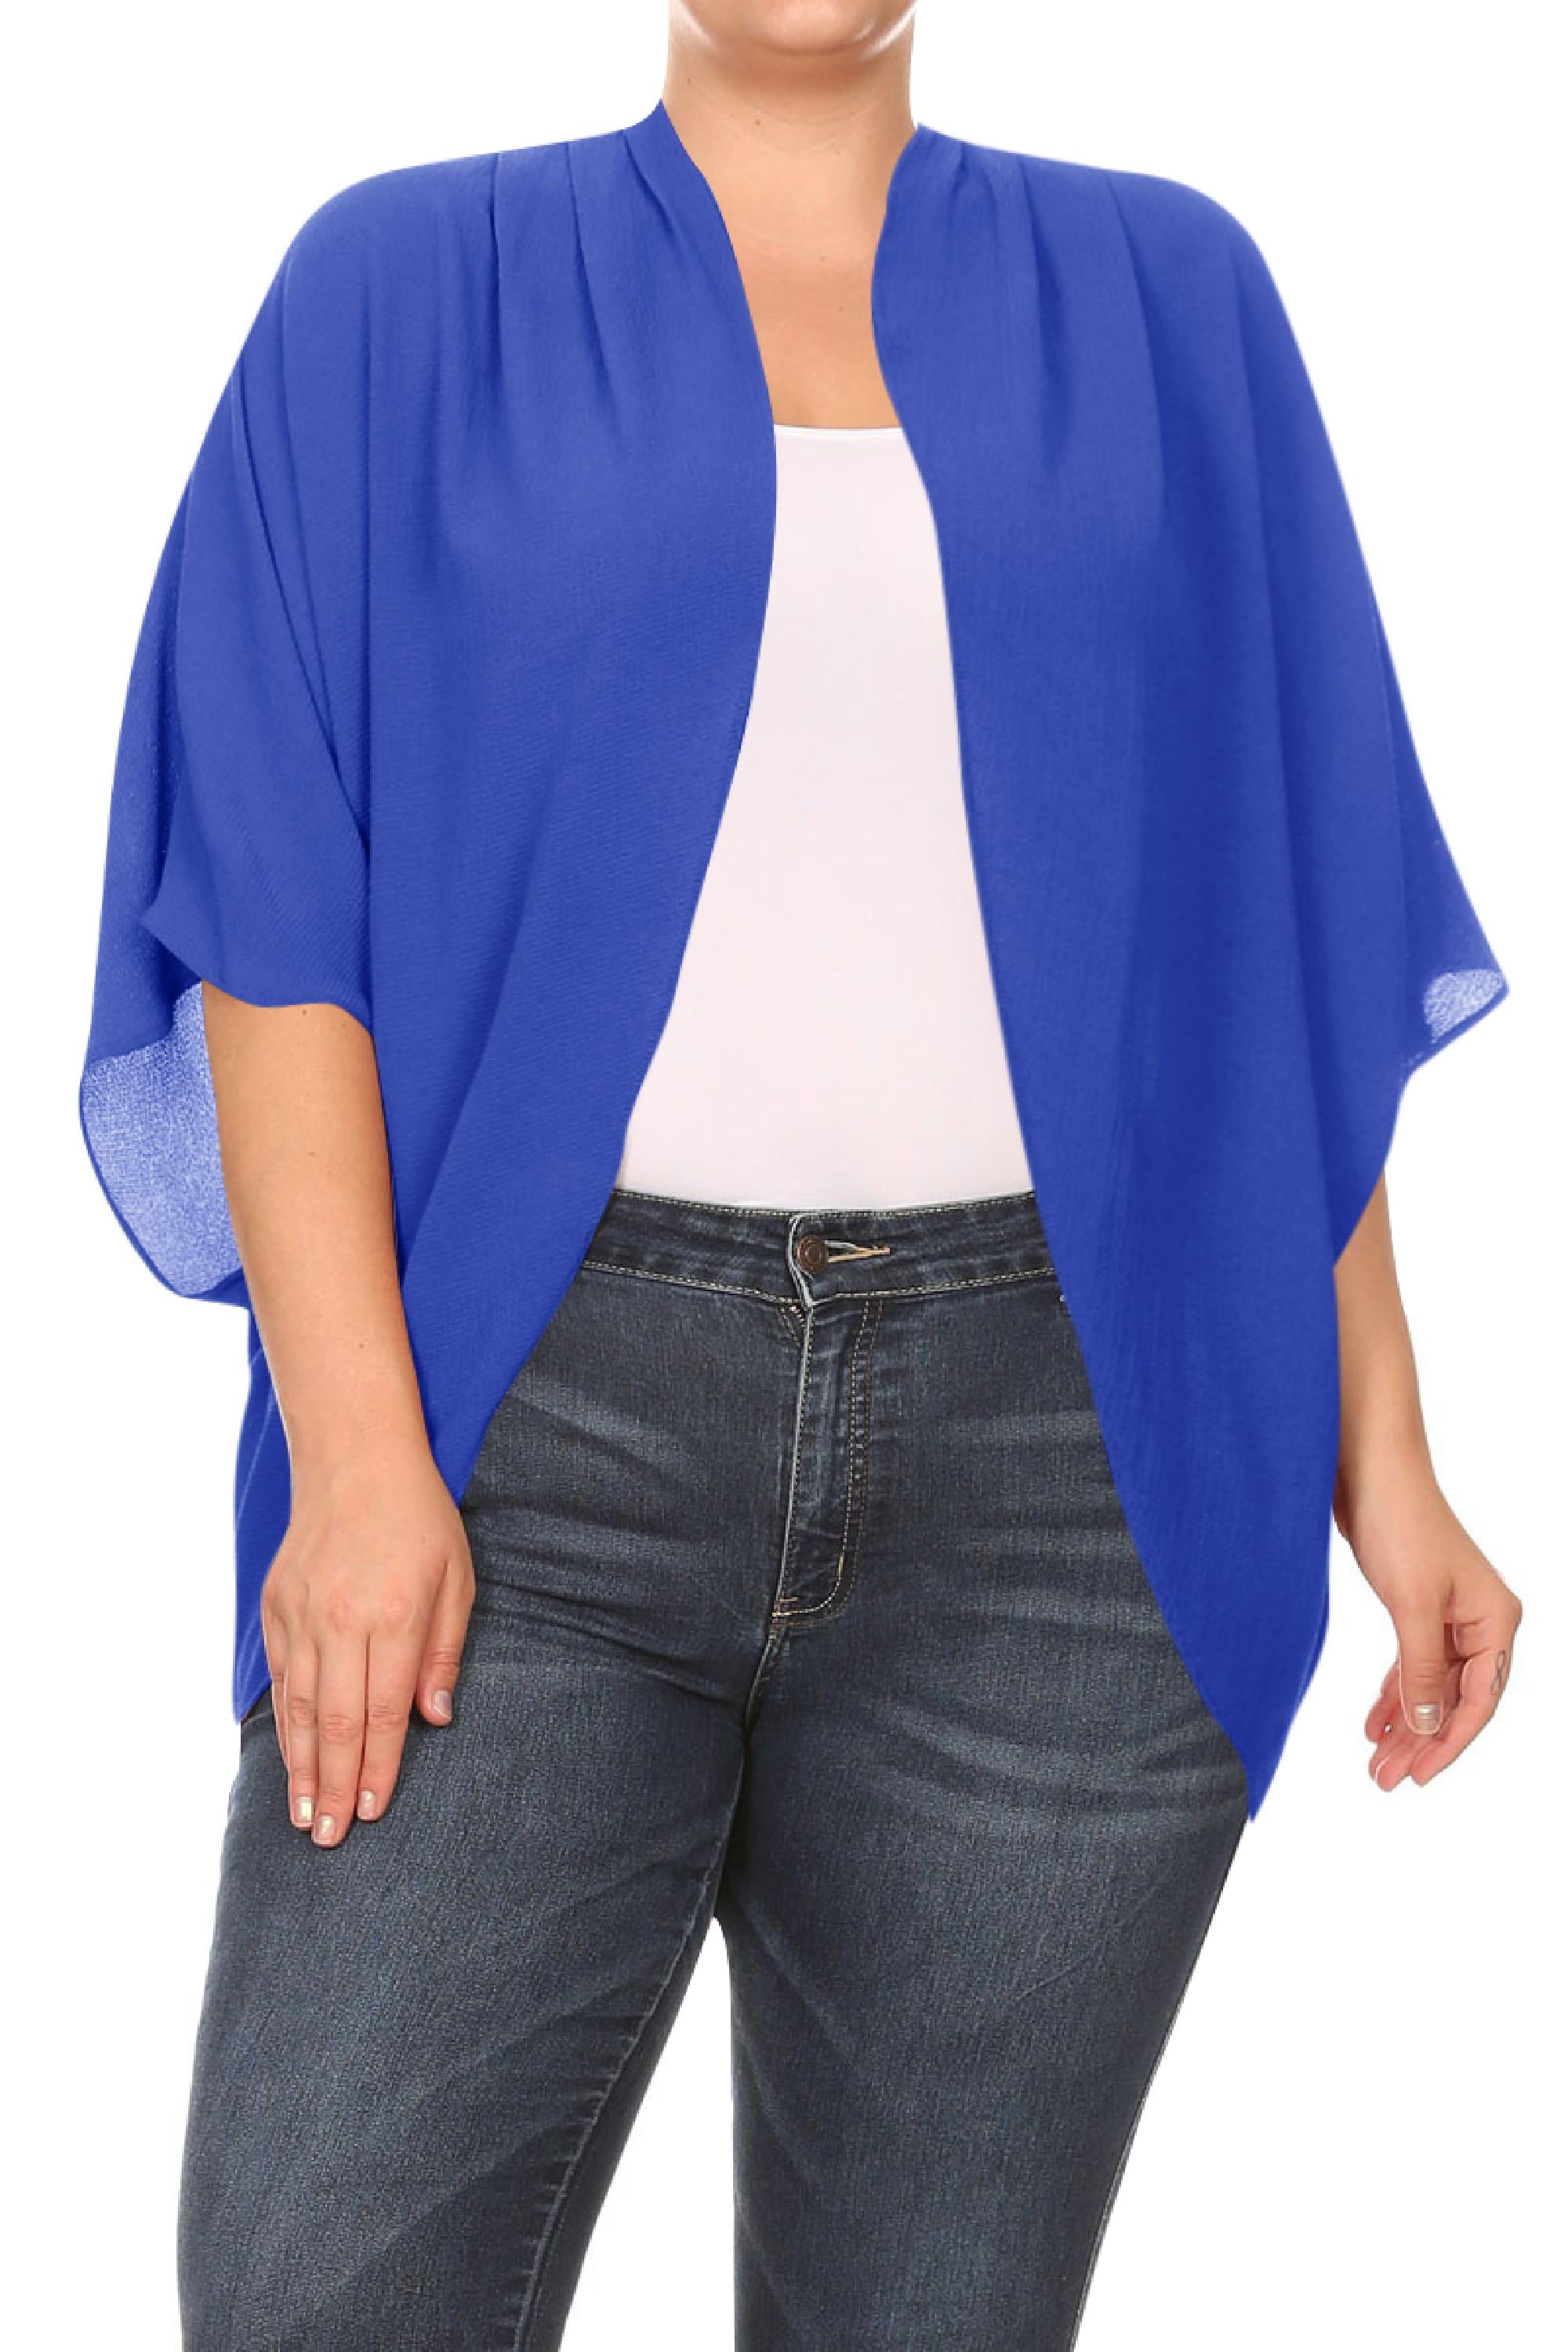 Women's Size Loose Fit 3/4 Sleeves Kimono Style Open Front Solid Cardigan Made in USA - Walmart.com